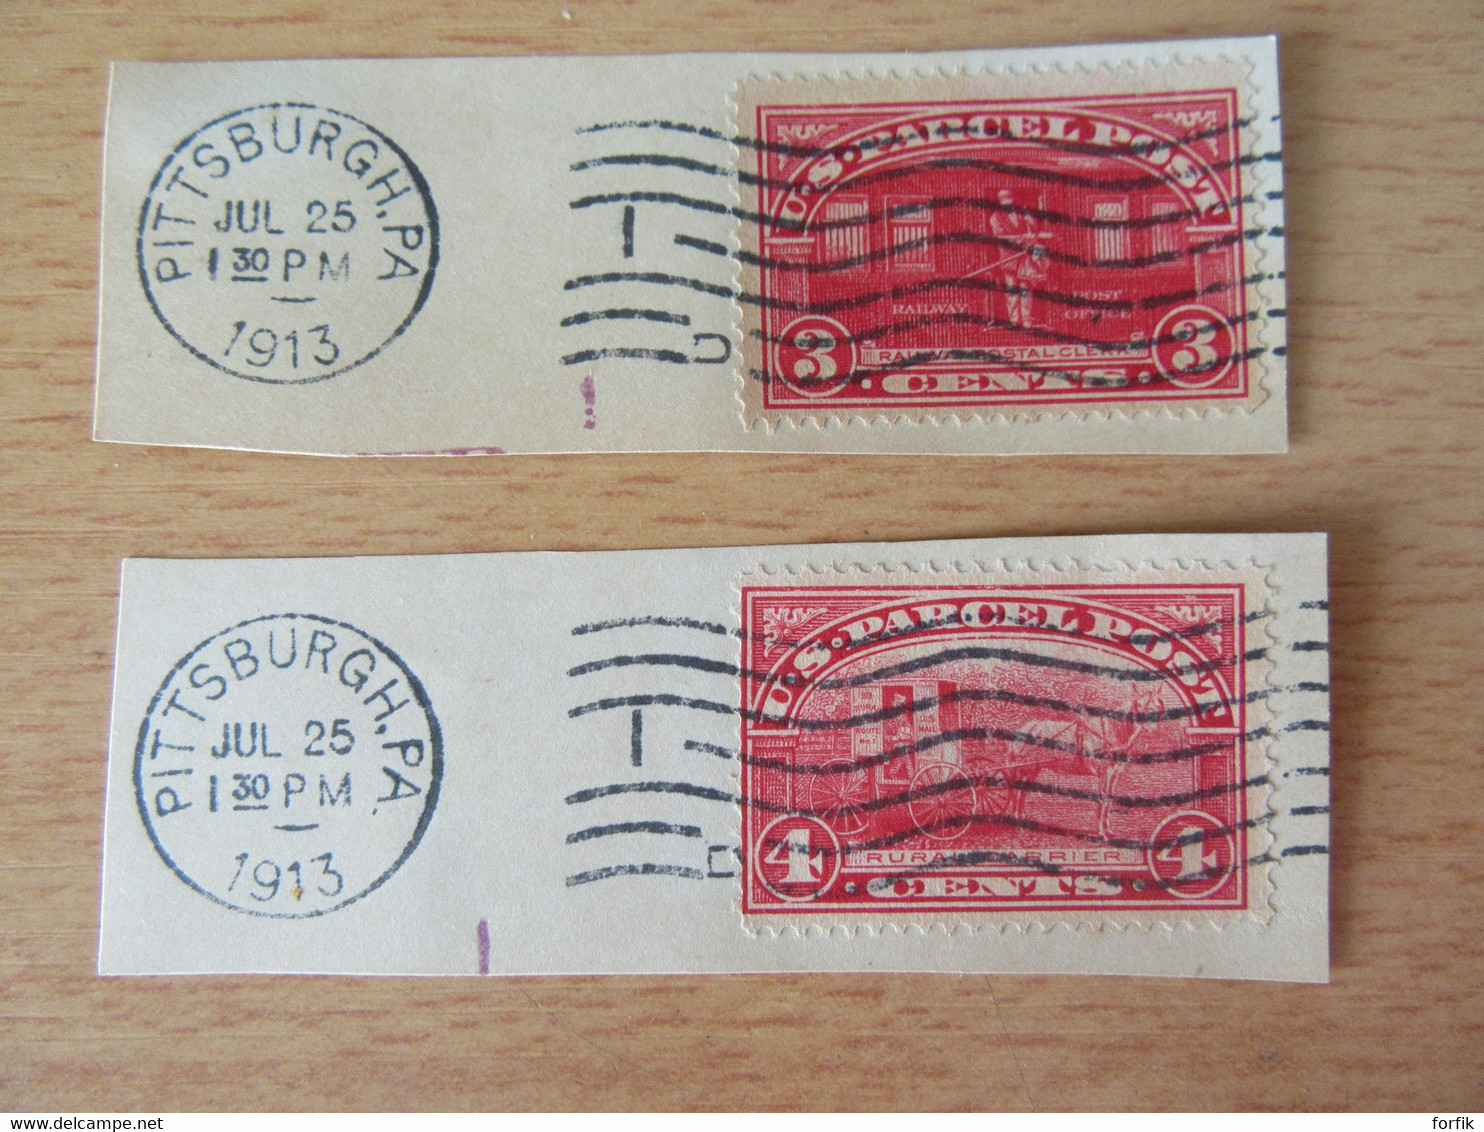 USA - Us Parcel Post - 2 Timbres Sur Fragments - Pittsburgh July 25 1913 - Reisgoedzegels